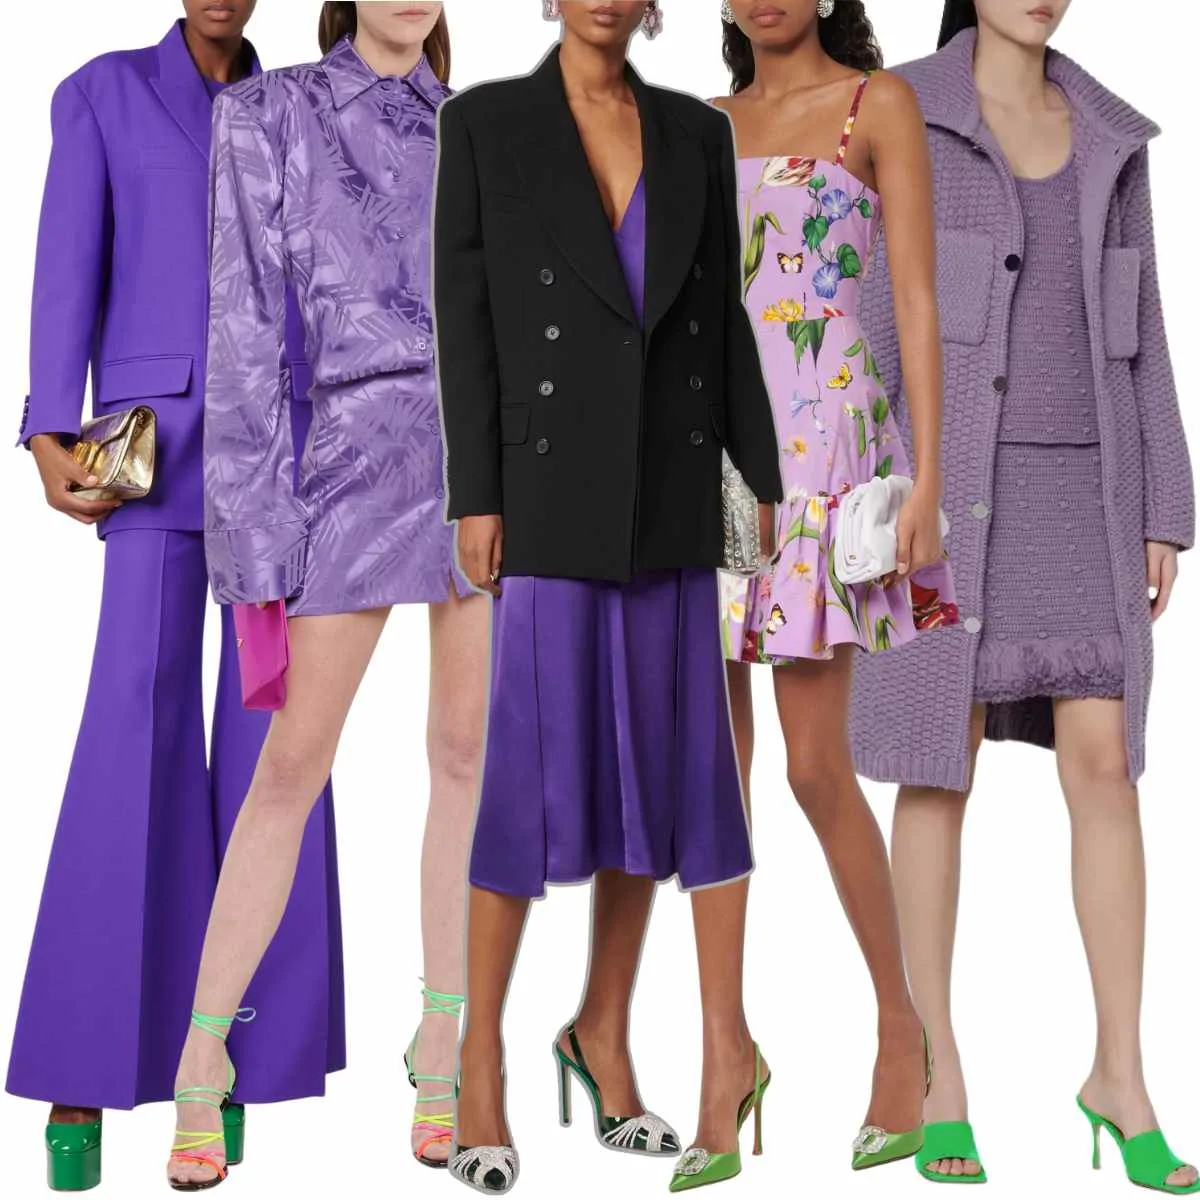 Collage of 5 women wearing different green shoes outfits with purple clothing.